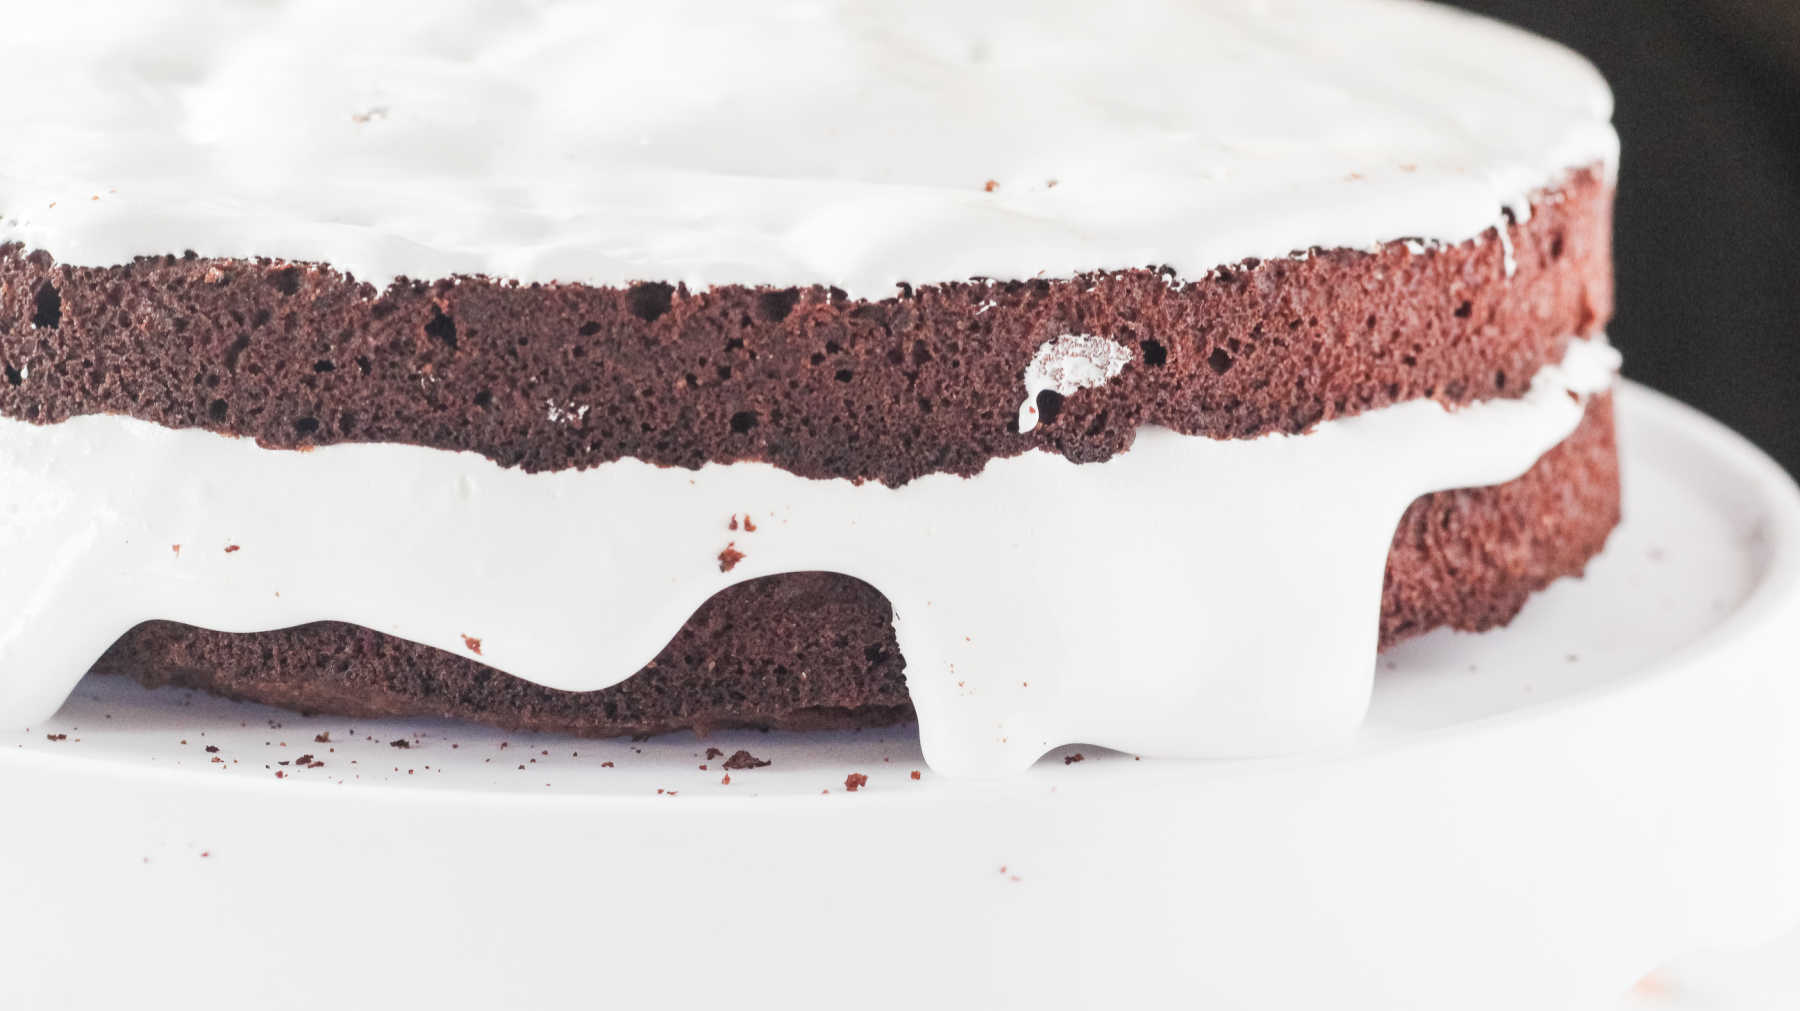 Layers of marshmallow fluff on top of layers of chocolate mudslide cake.